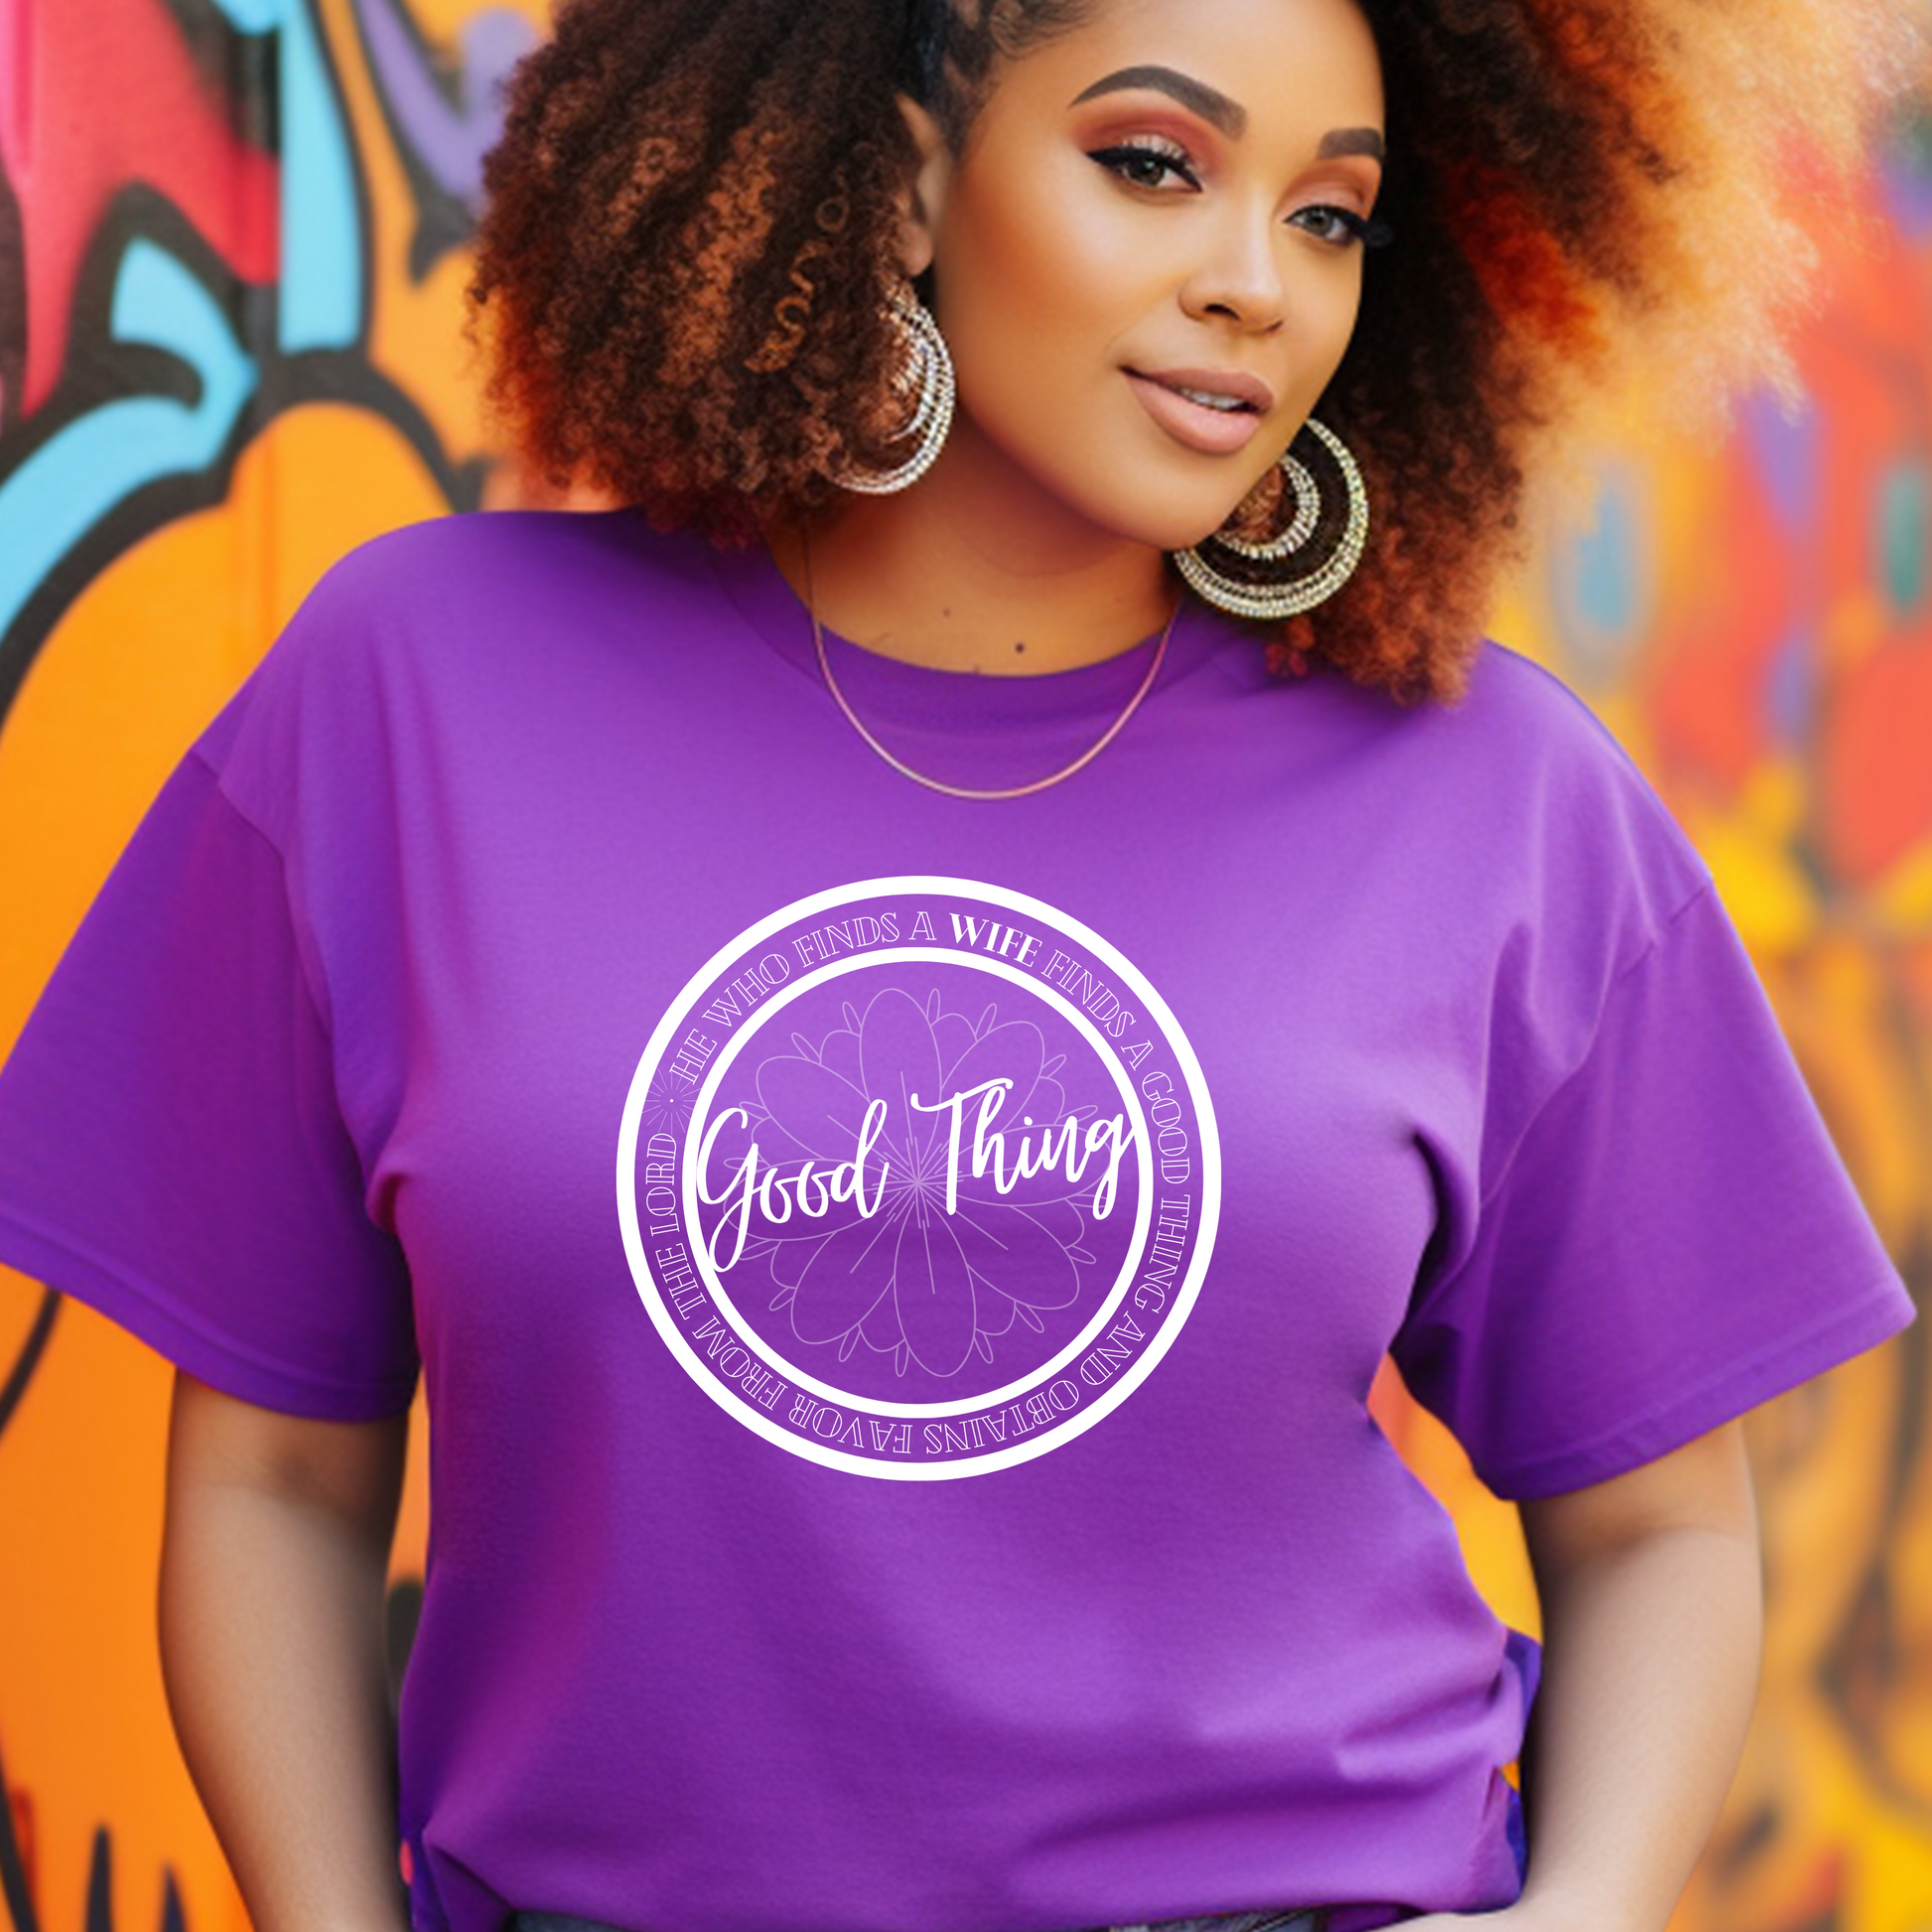 Elegant purple 'Good Thing' T-shirt from Triumph Tees, based on Proverbs 18:22. This faith-centric apparel is a fashionable way to express your belief and God's favor.